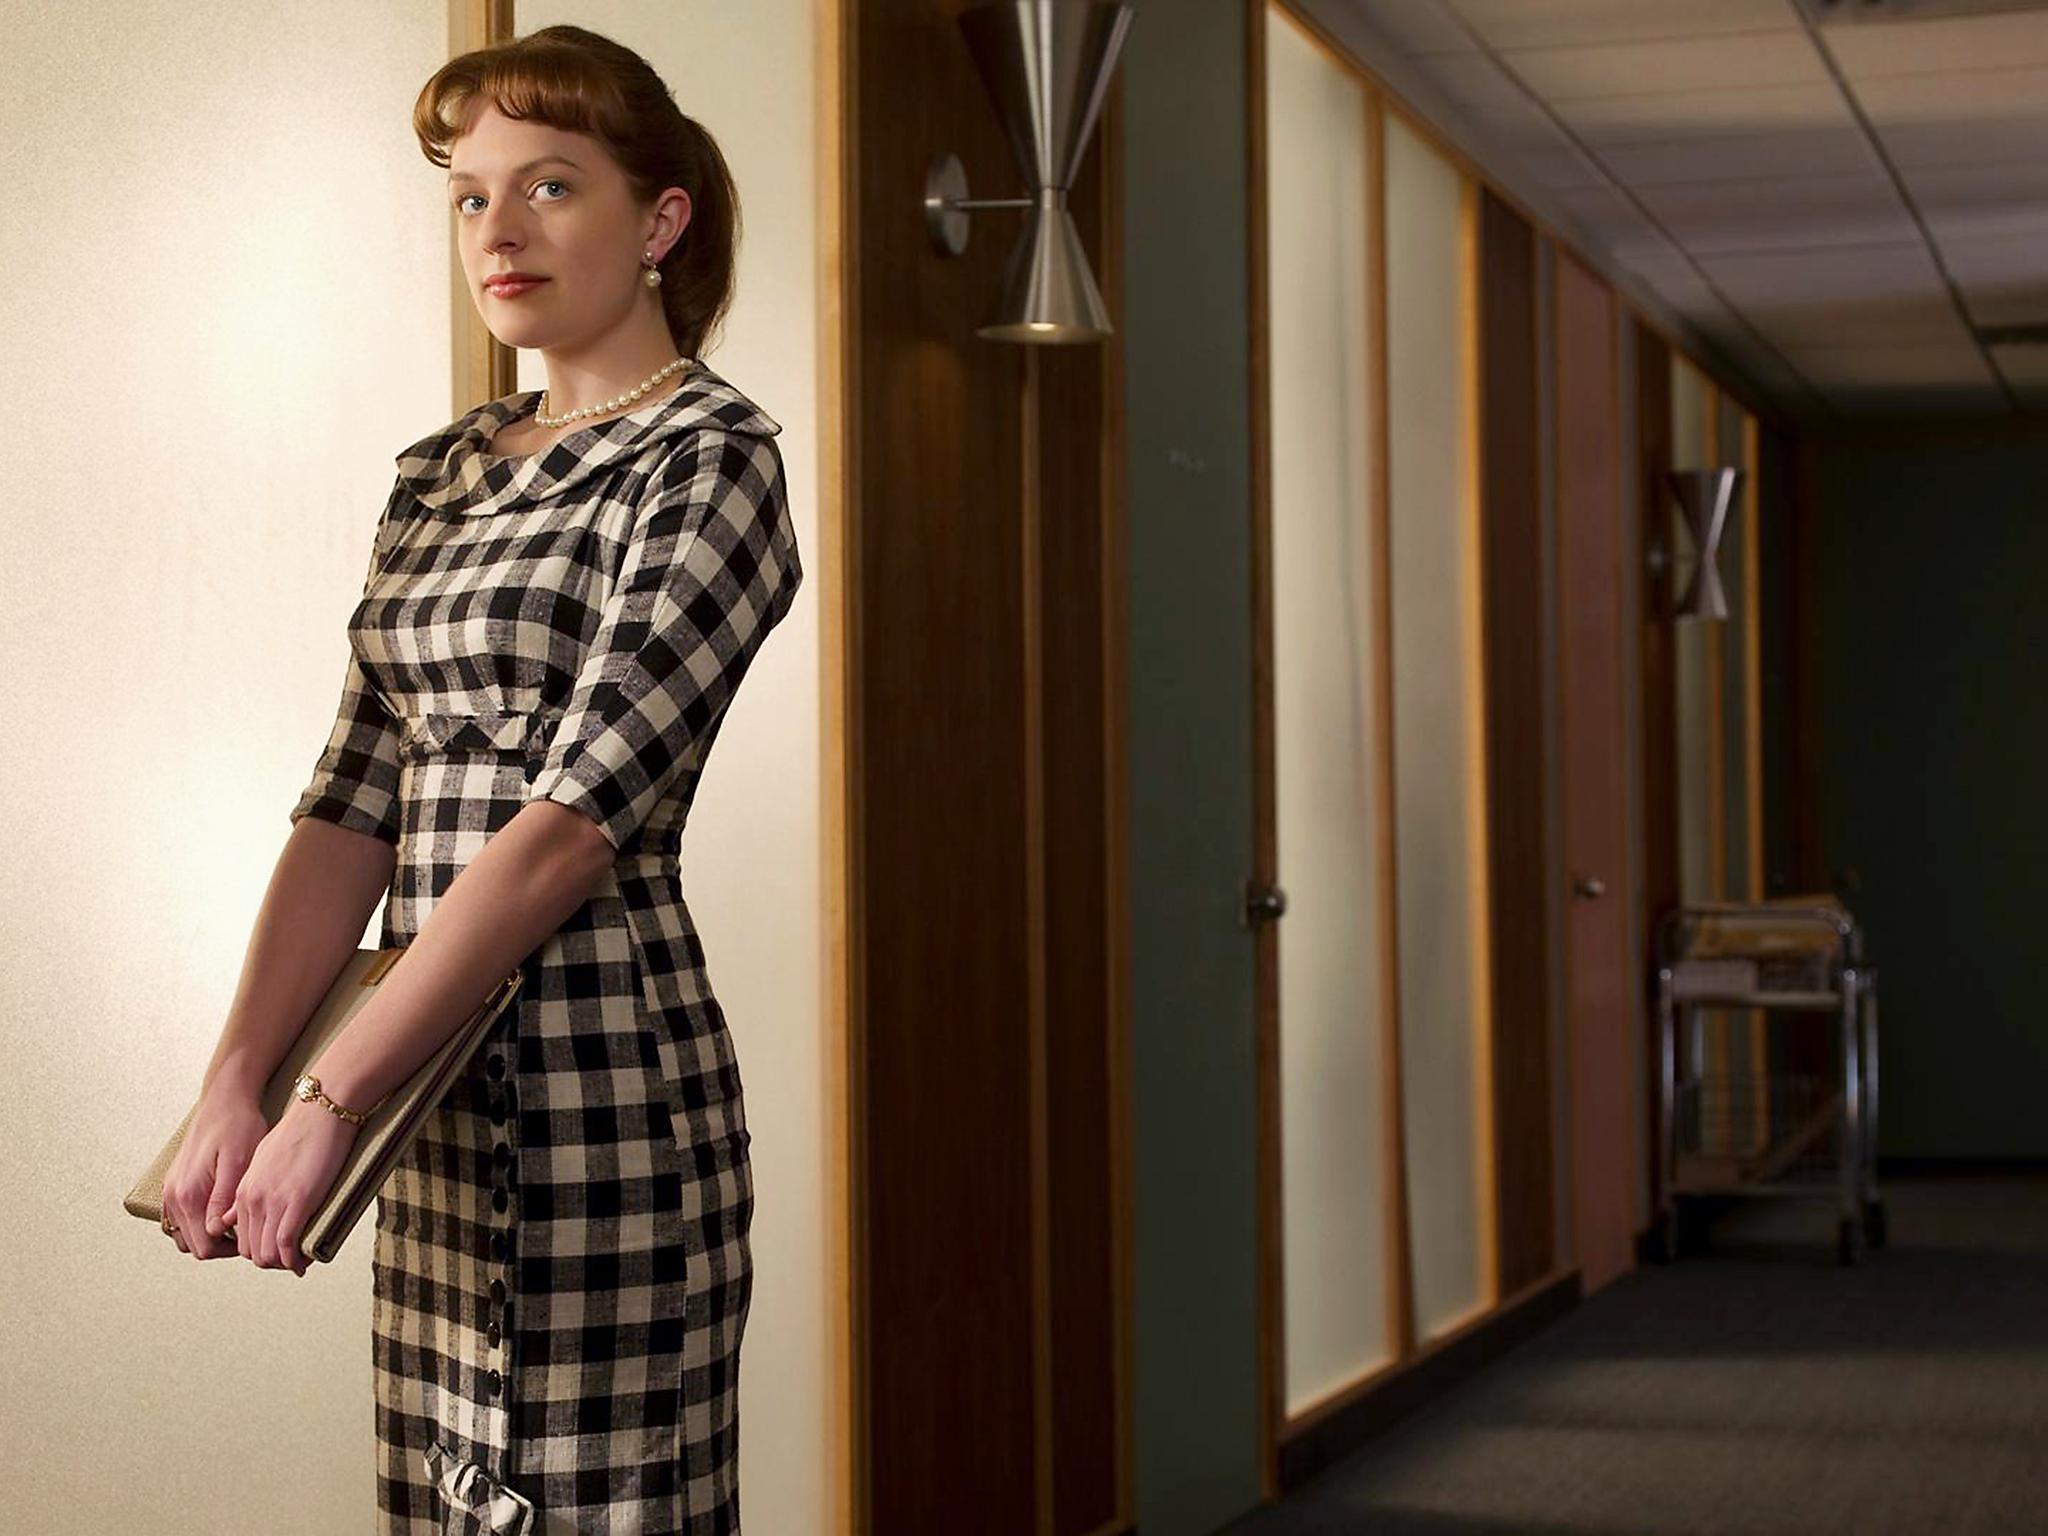 The actress may be best known for playing Peggy Olson in ‘Mad Men’